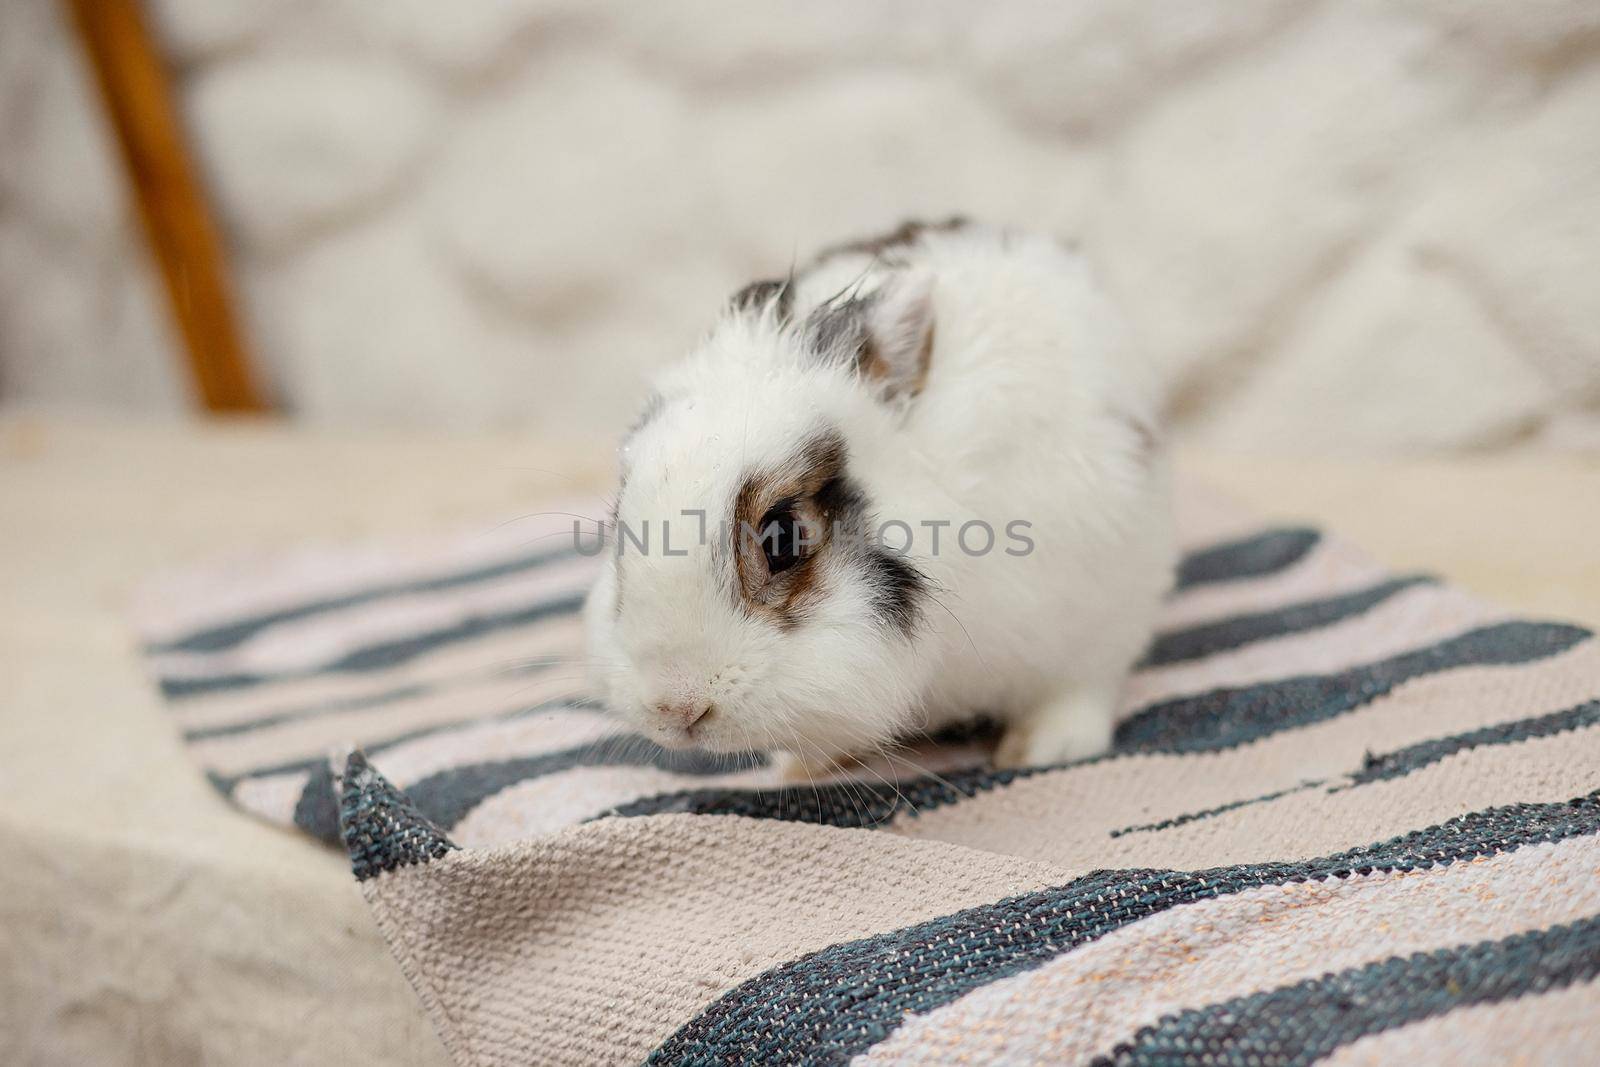 A cute little decorative rabbit, white and gray in color, sits on a striped rug against a white wall